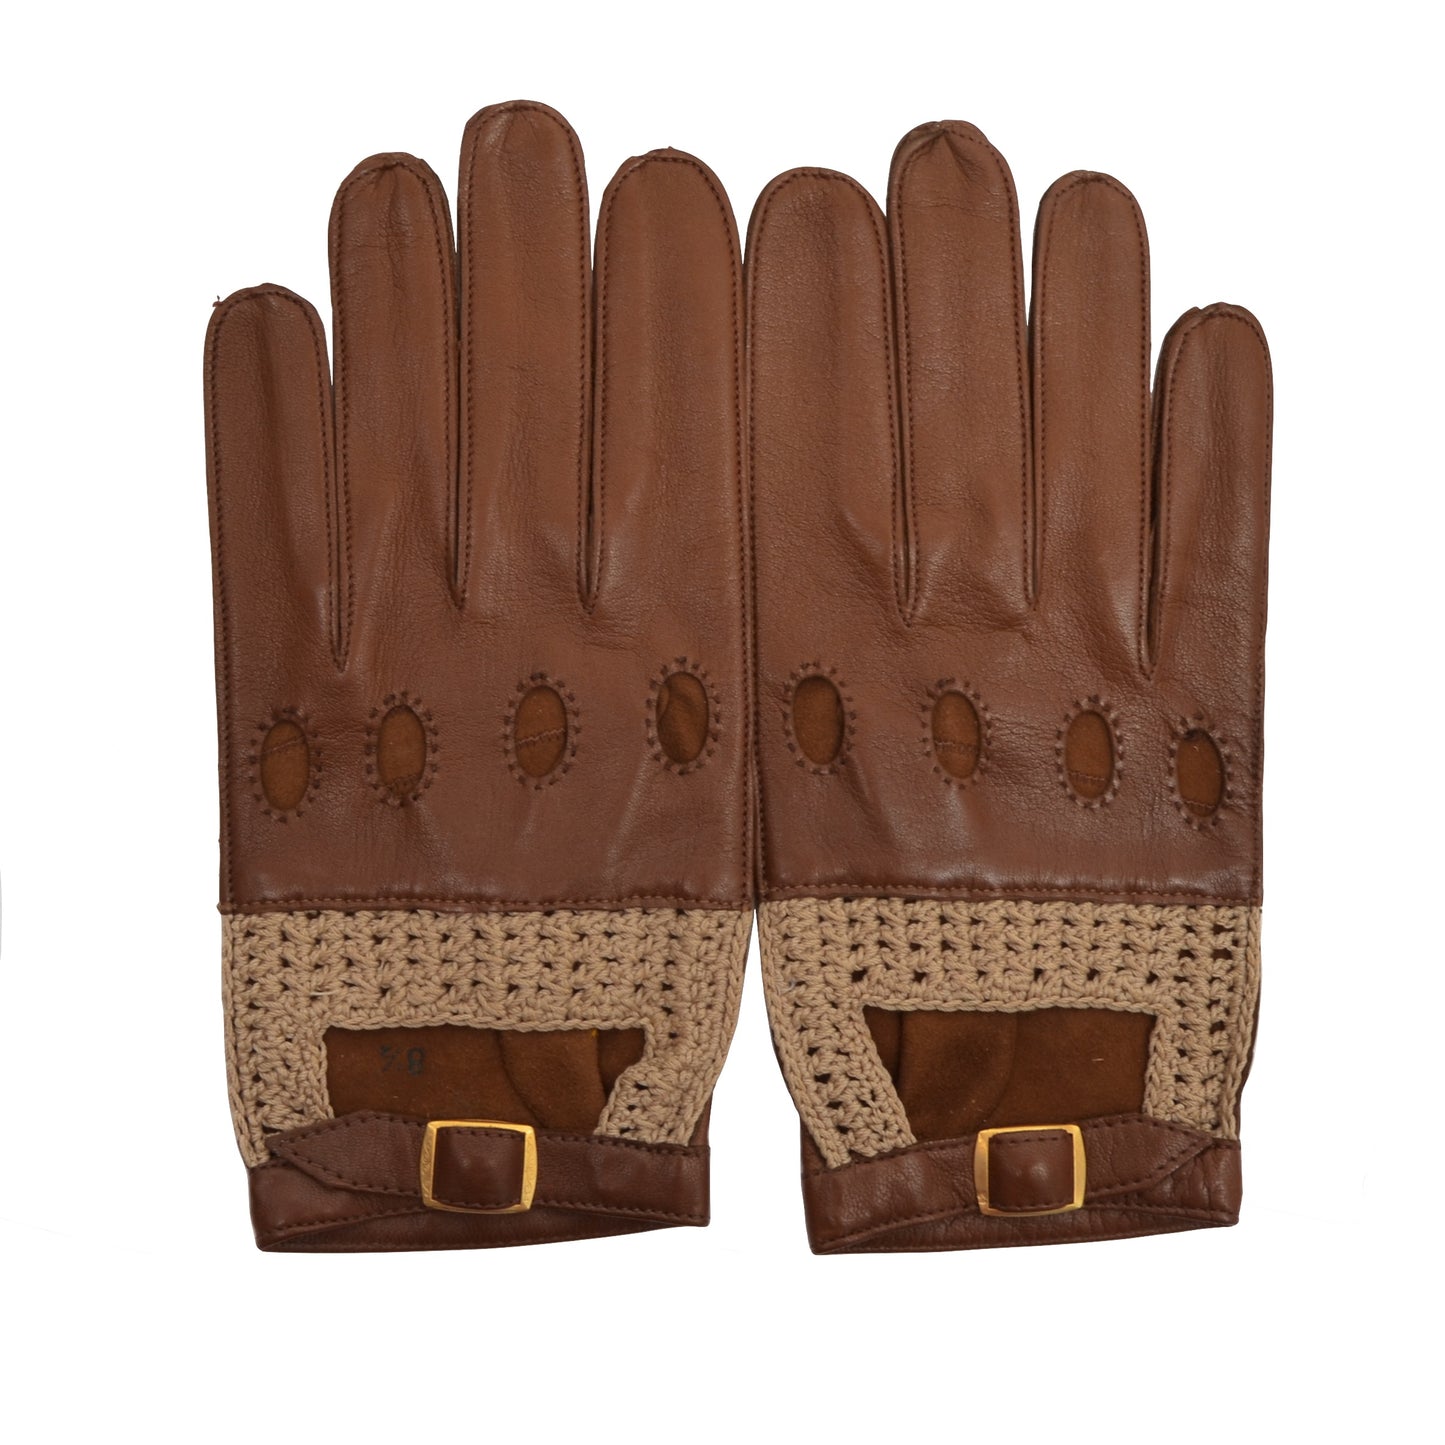 Unlined Leather/Knit Driving Gloves Size 8.5 - Brown